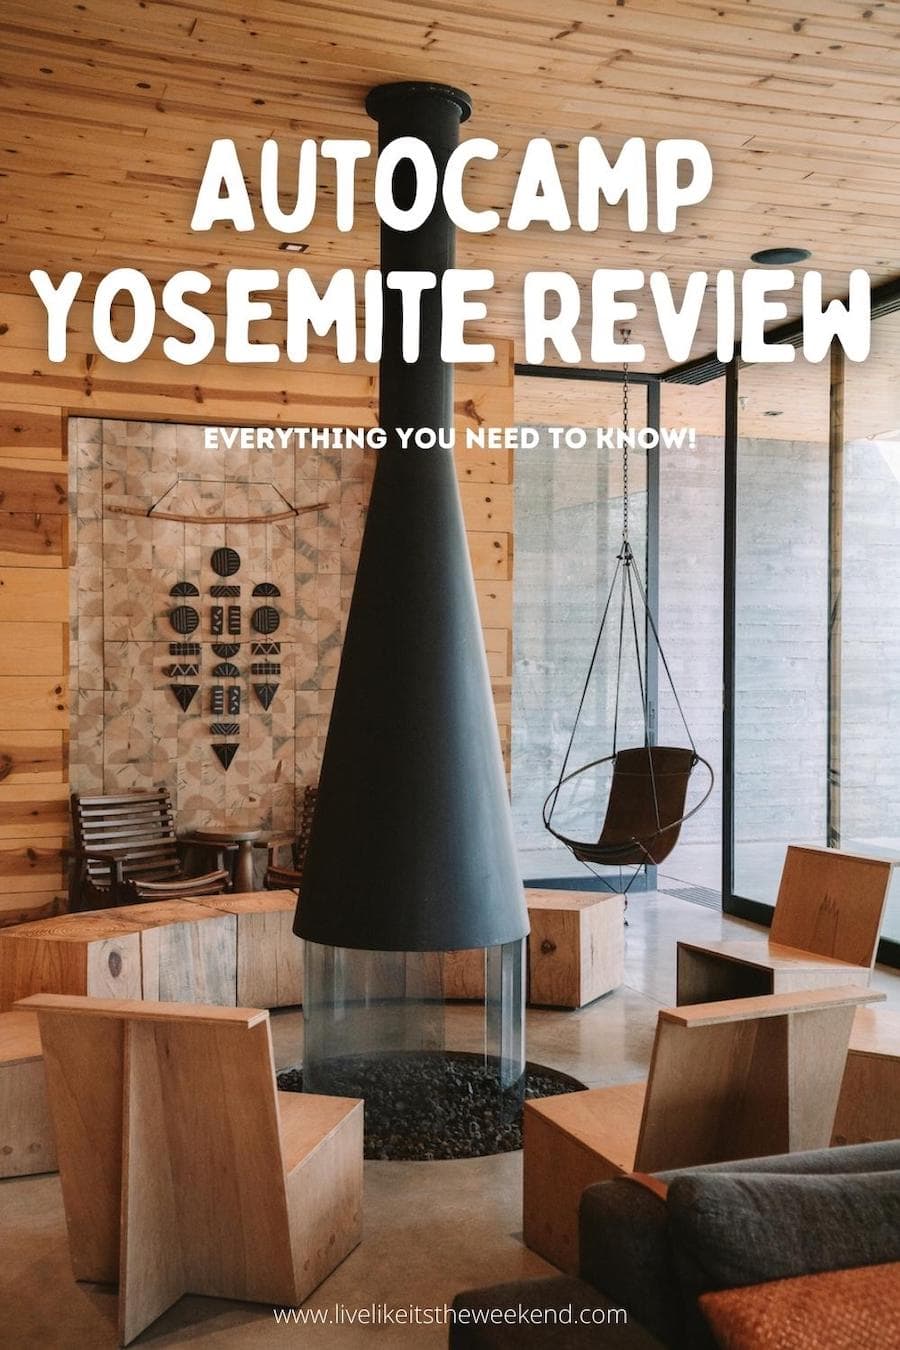 AutoCamp Yosemite review pin cover